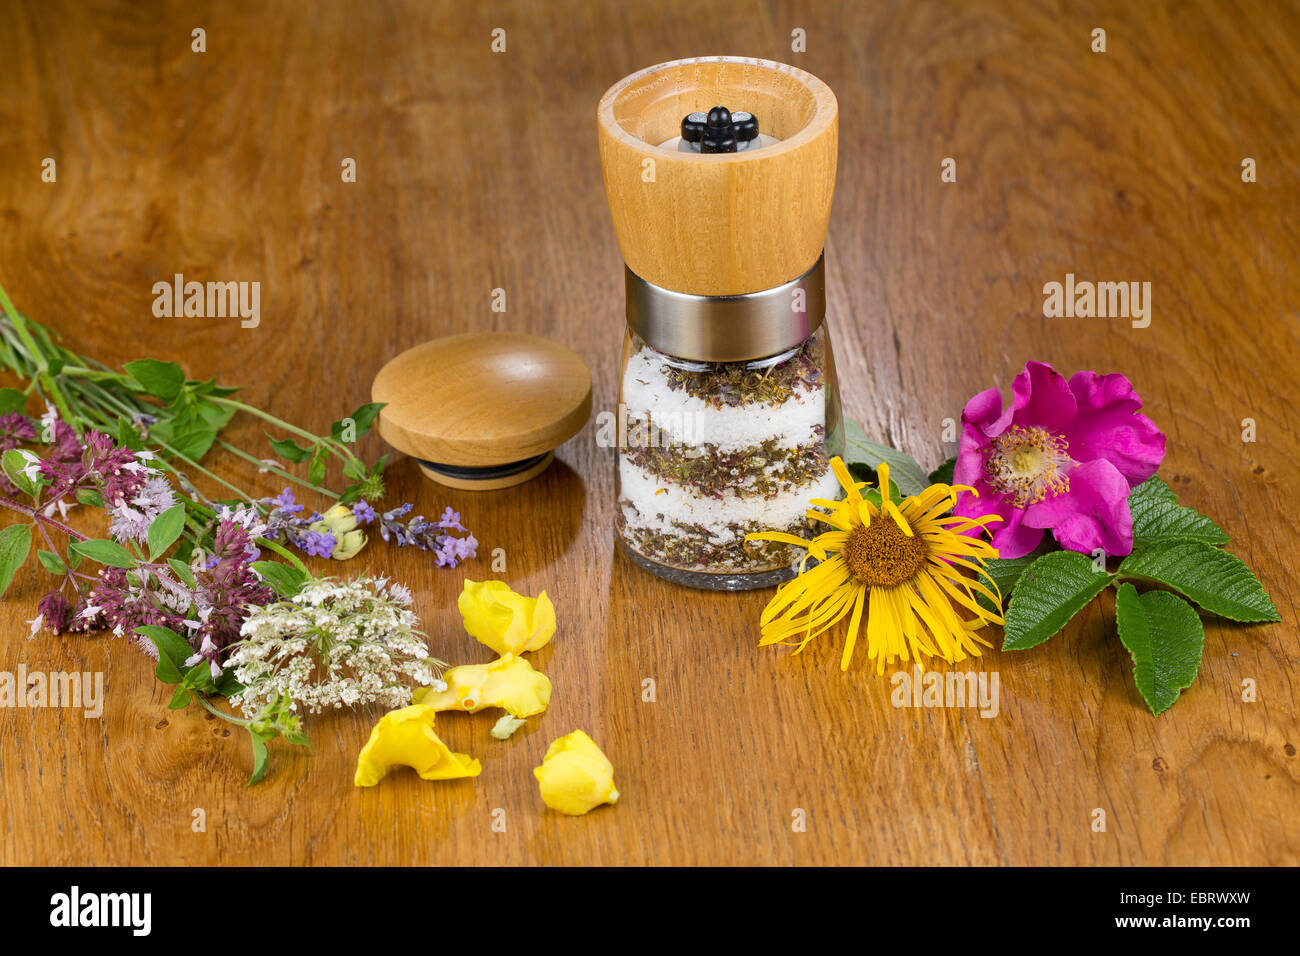 spice grinder with blossoms salt, flavoured wit eatable flowers Stock Photo